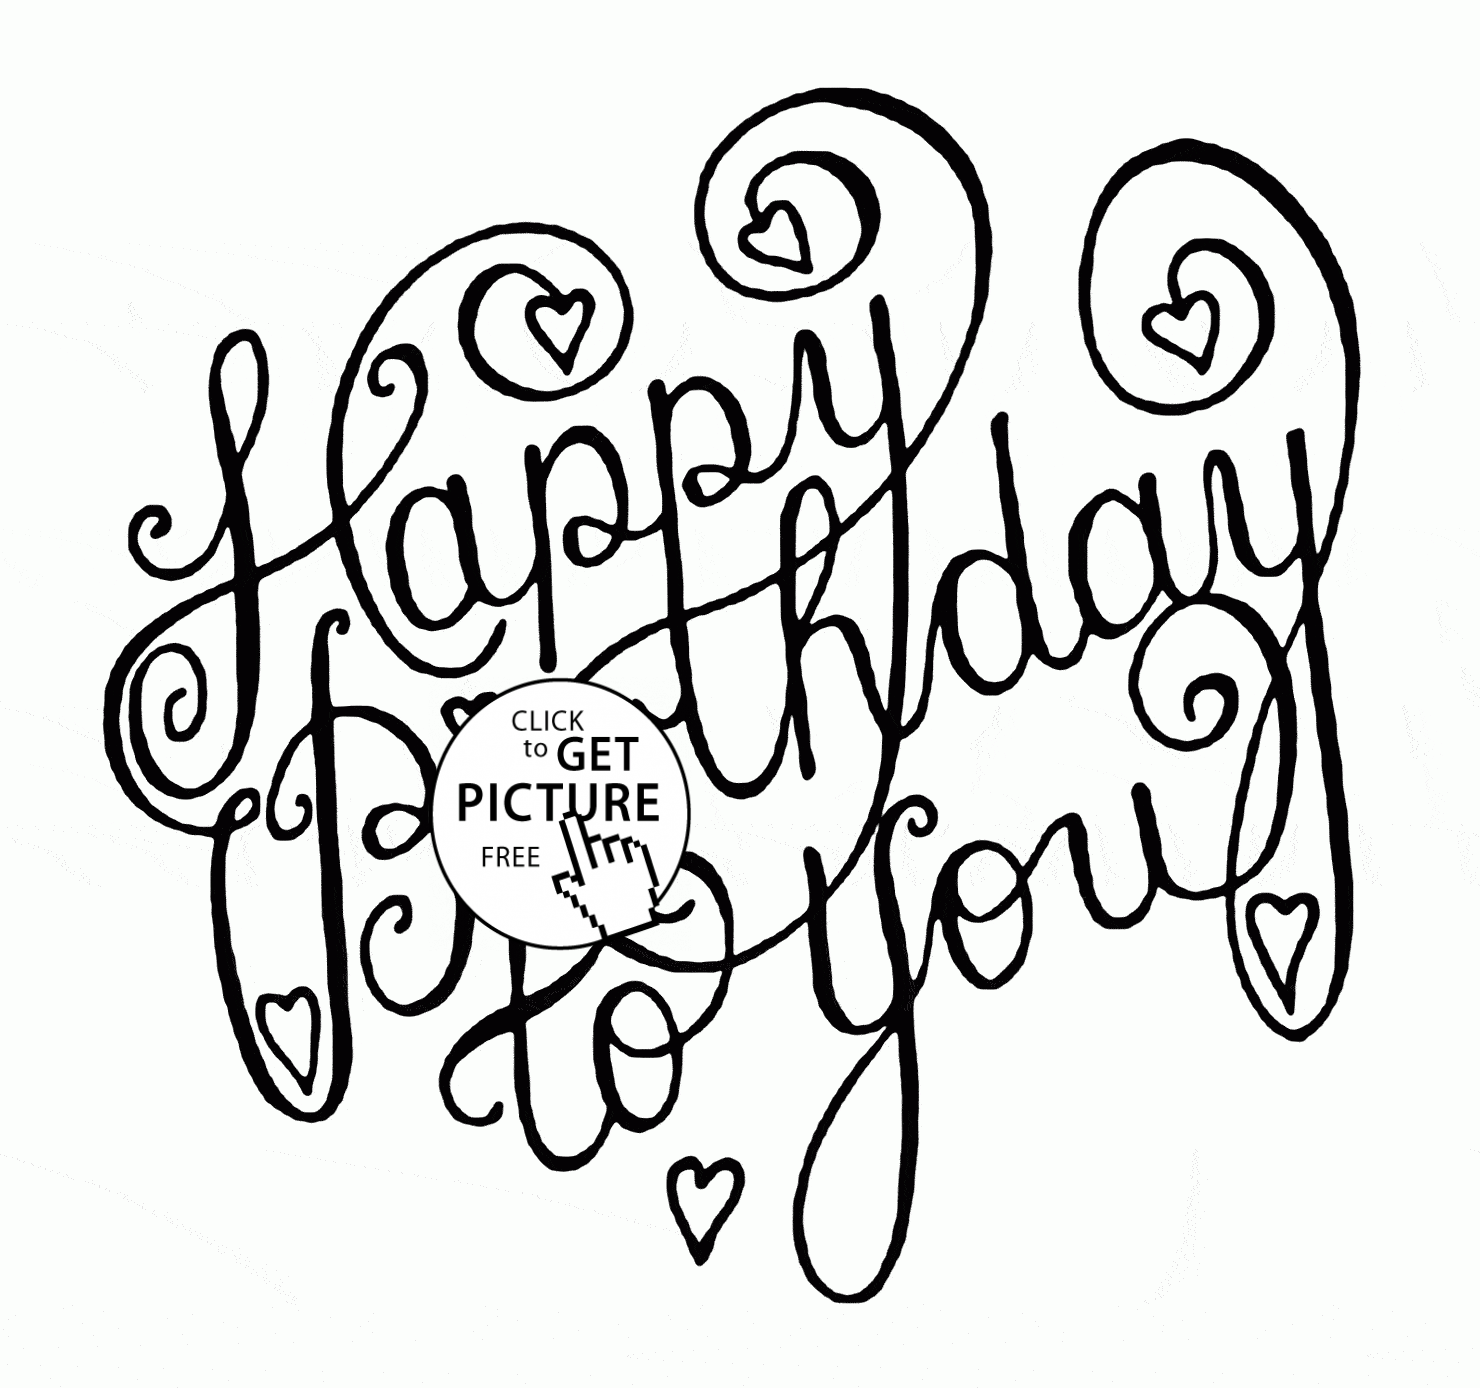 1480x1388 Happy Birthday to You Card coloring page for kids holiday